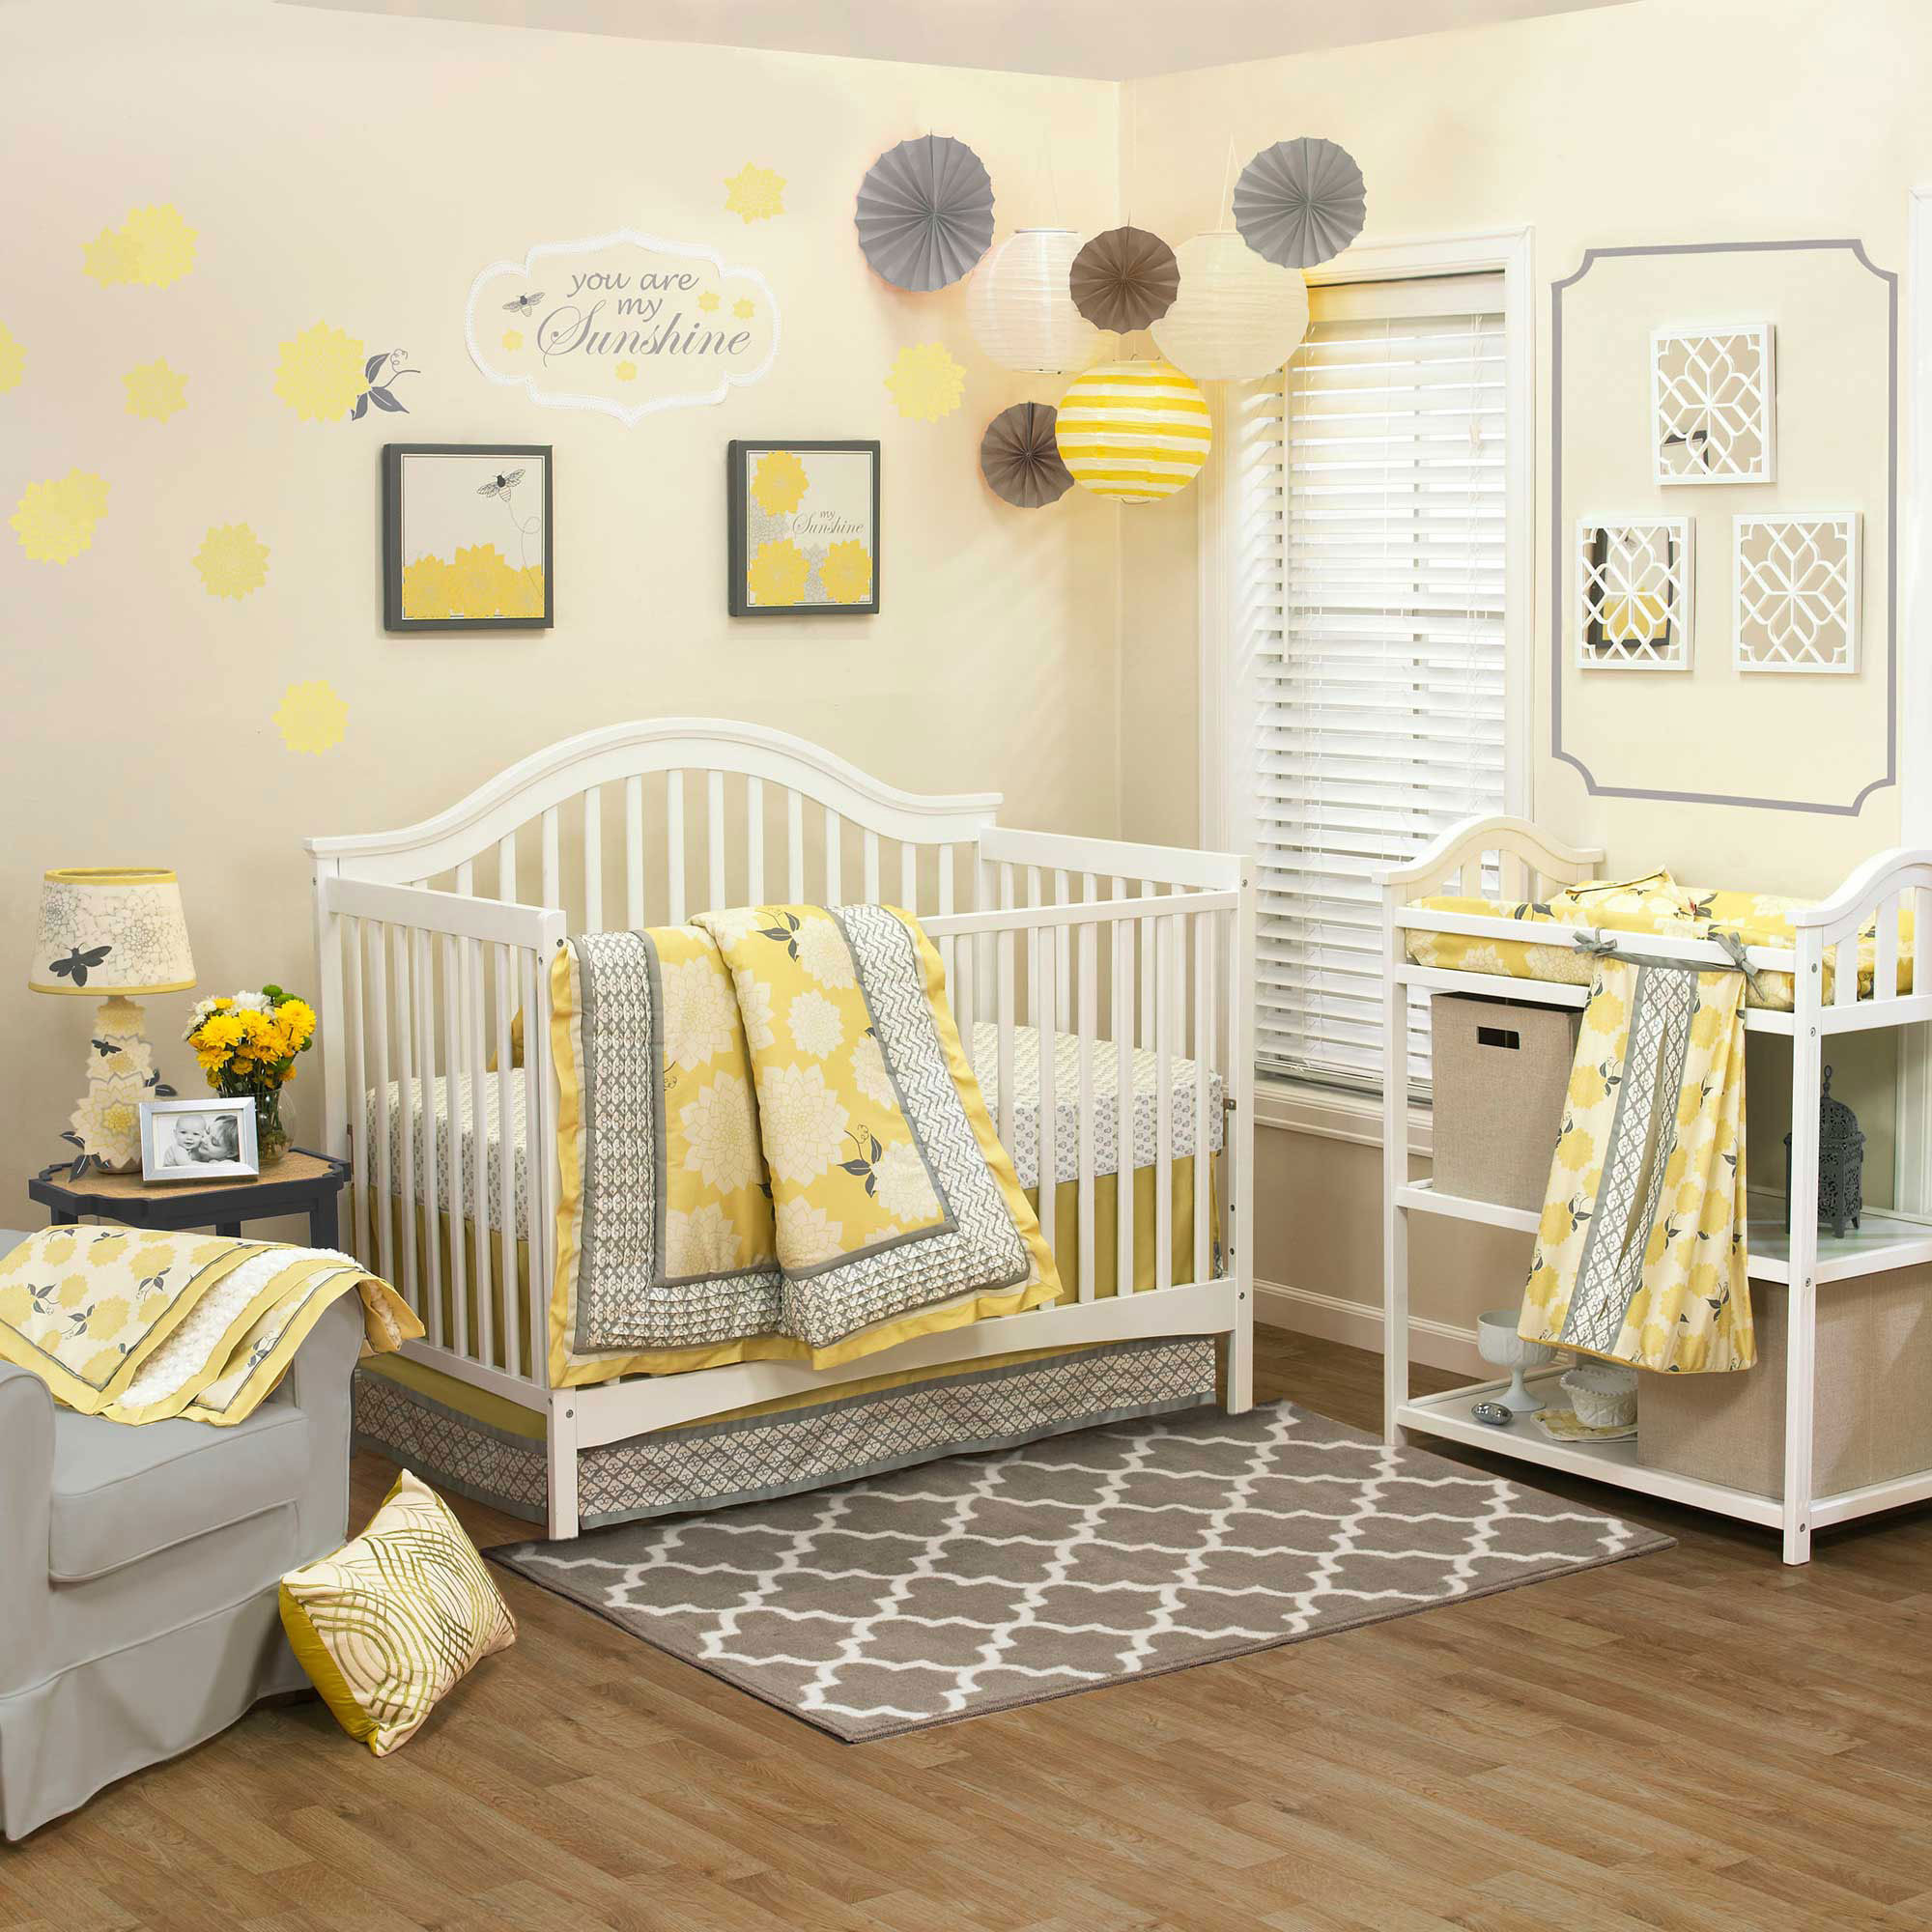 Baby Girl Room Decorations
 Baby Girl Nursery Ideas 10 Pretty Examples Decorating Room